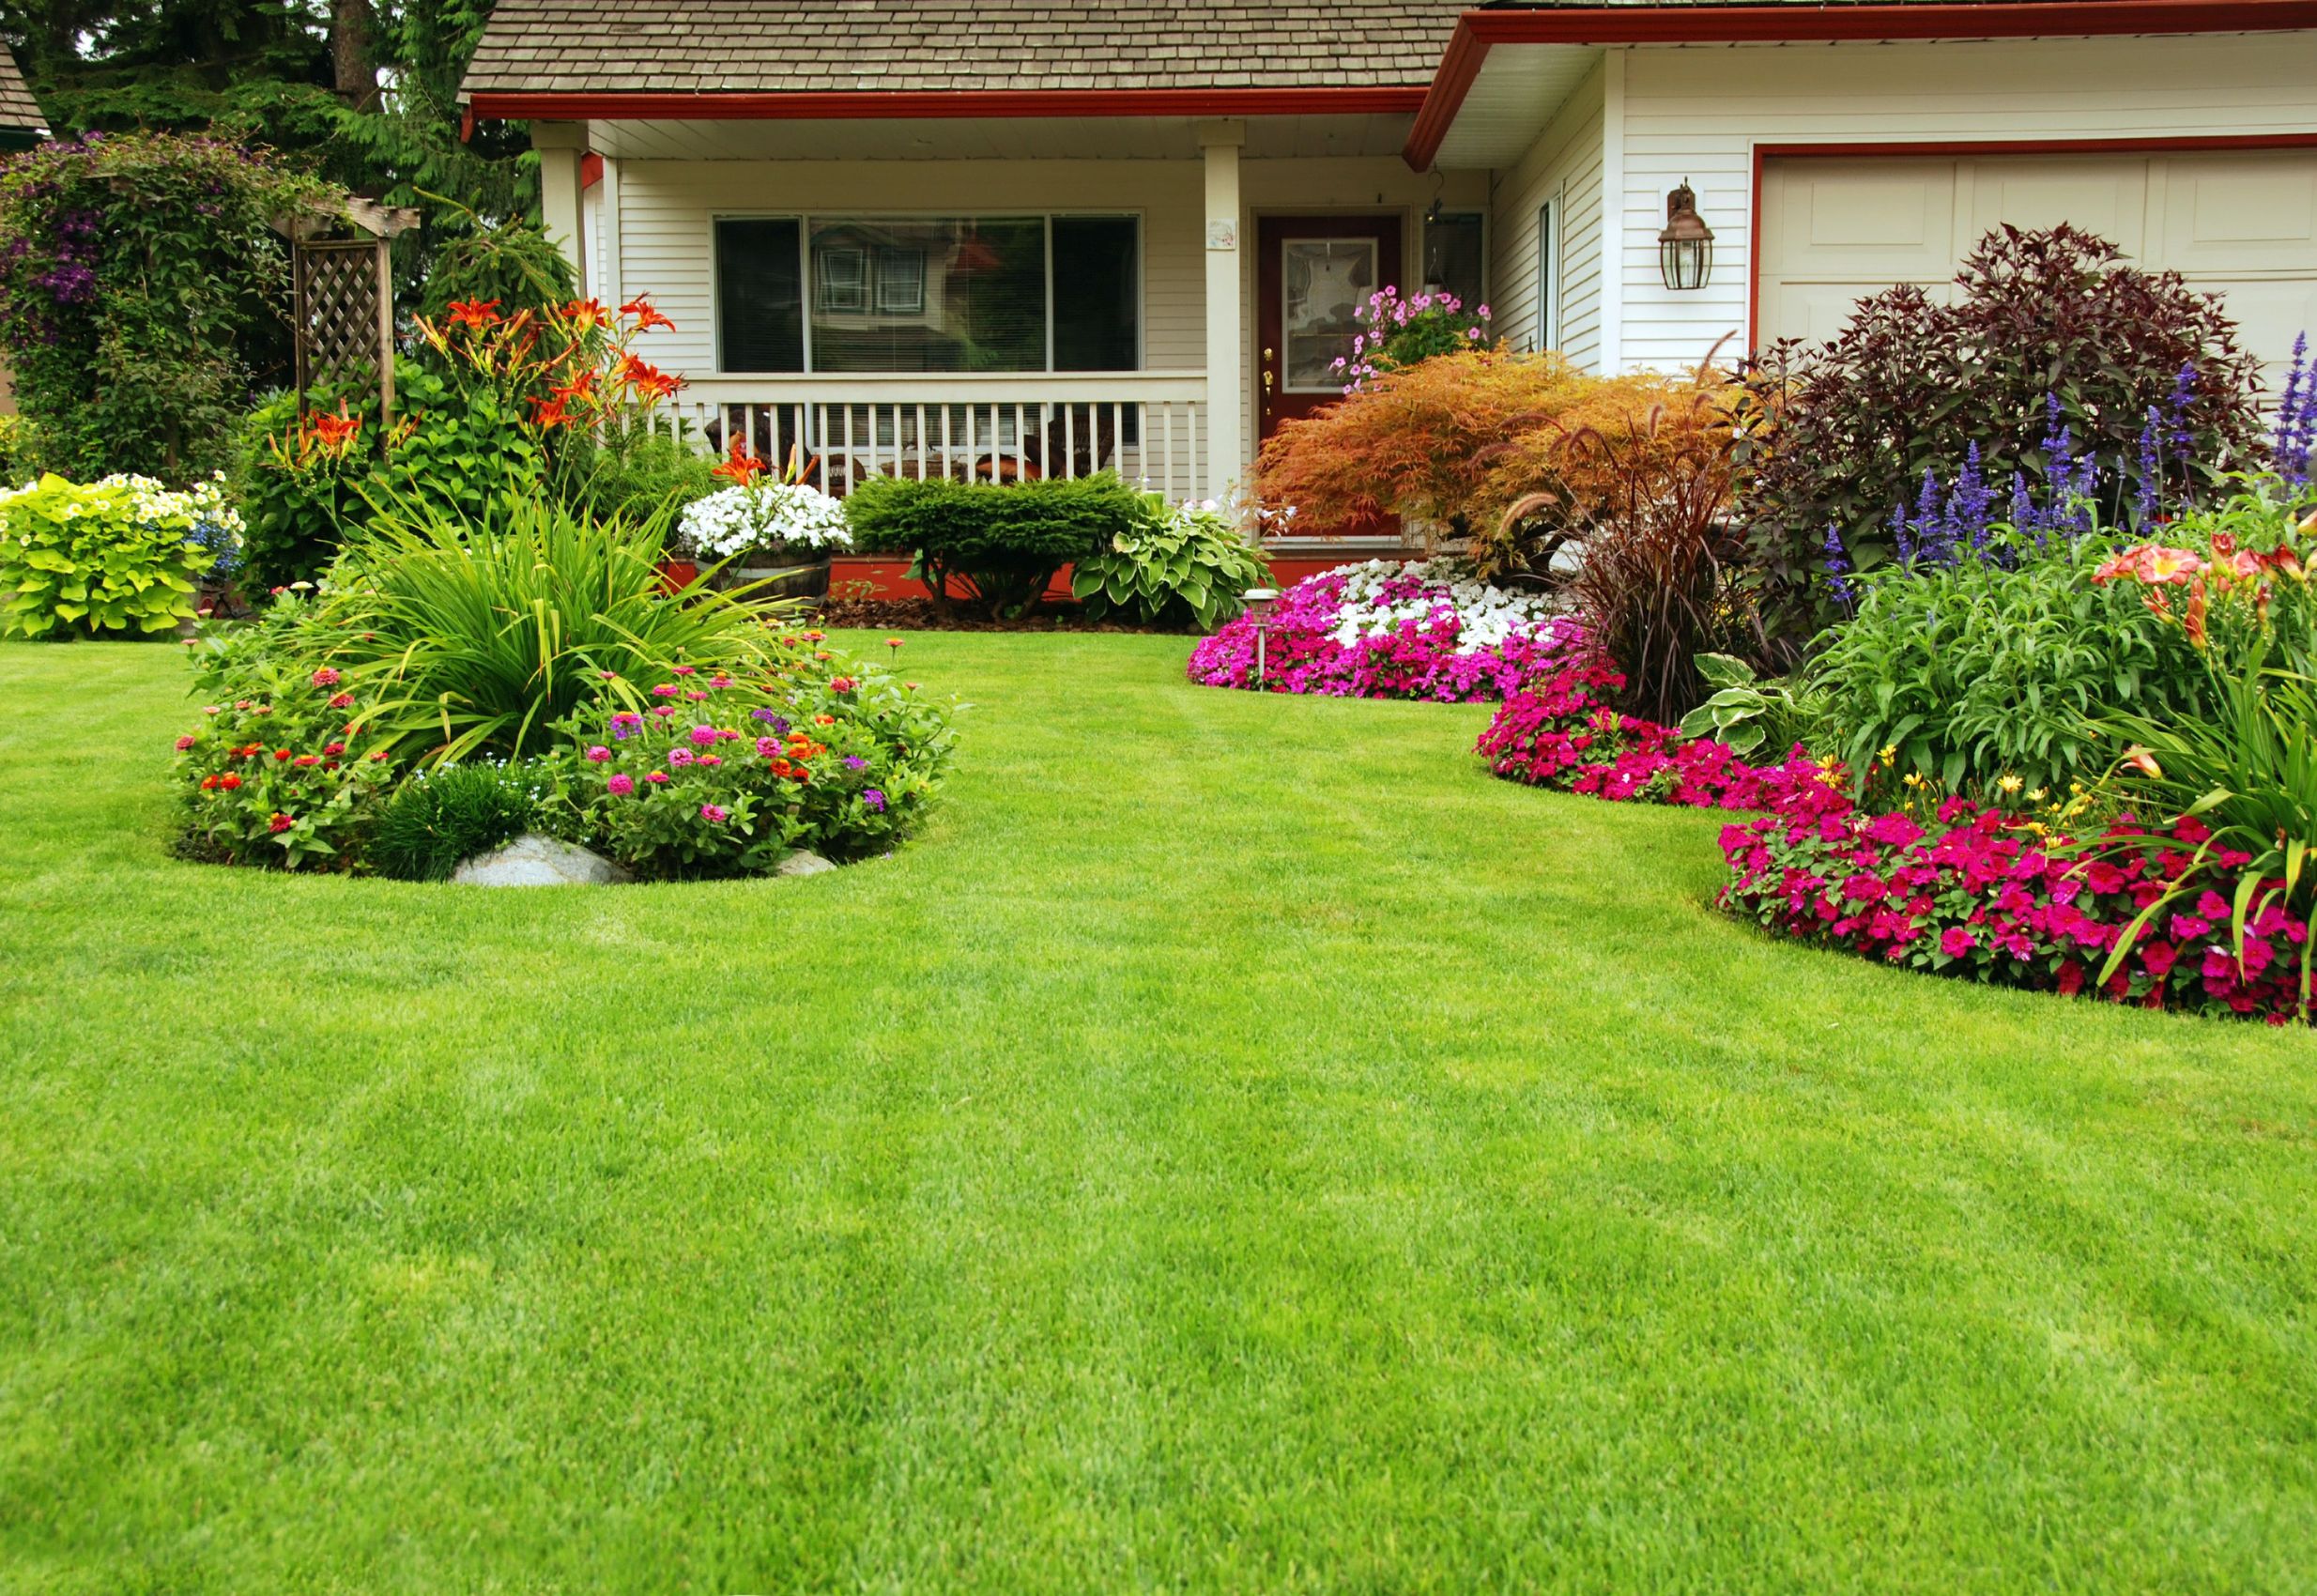 2 Excellent Reasons to Hire Professional Lawn Care in St. Louis, MO